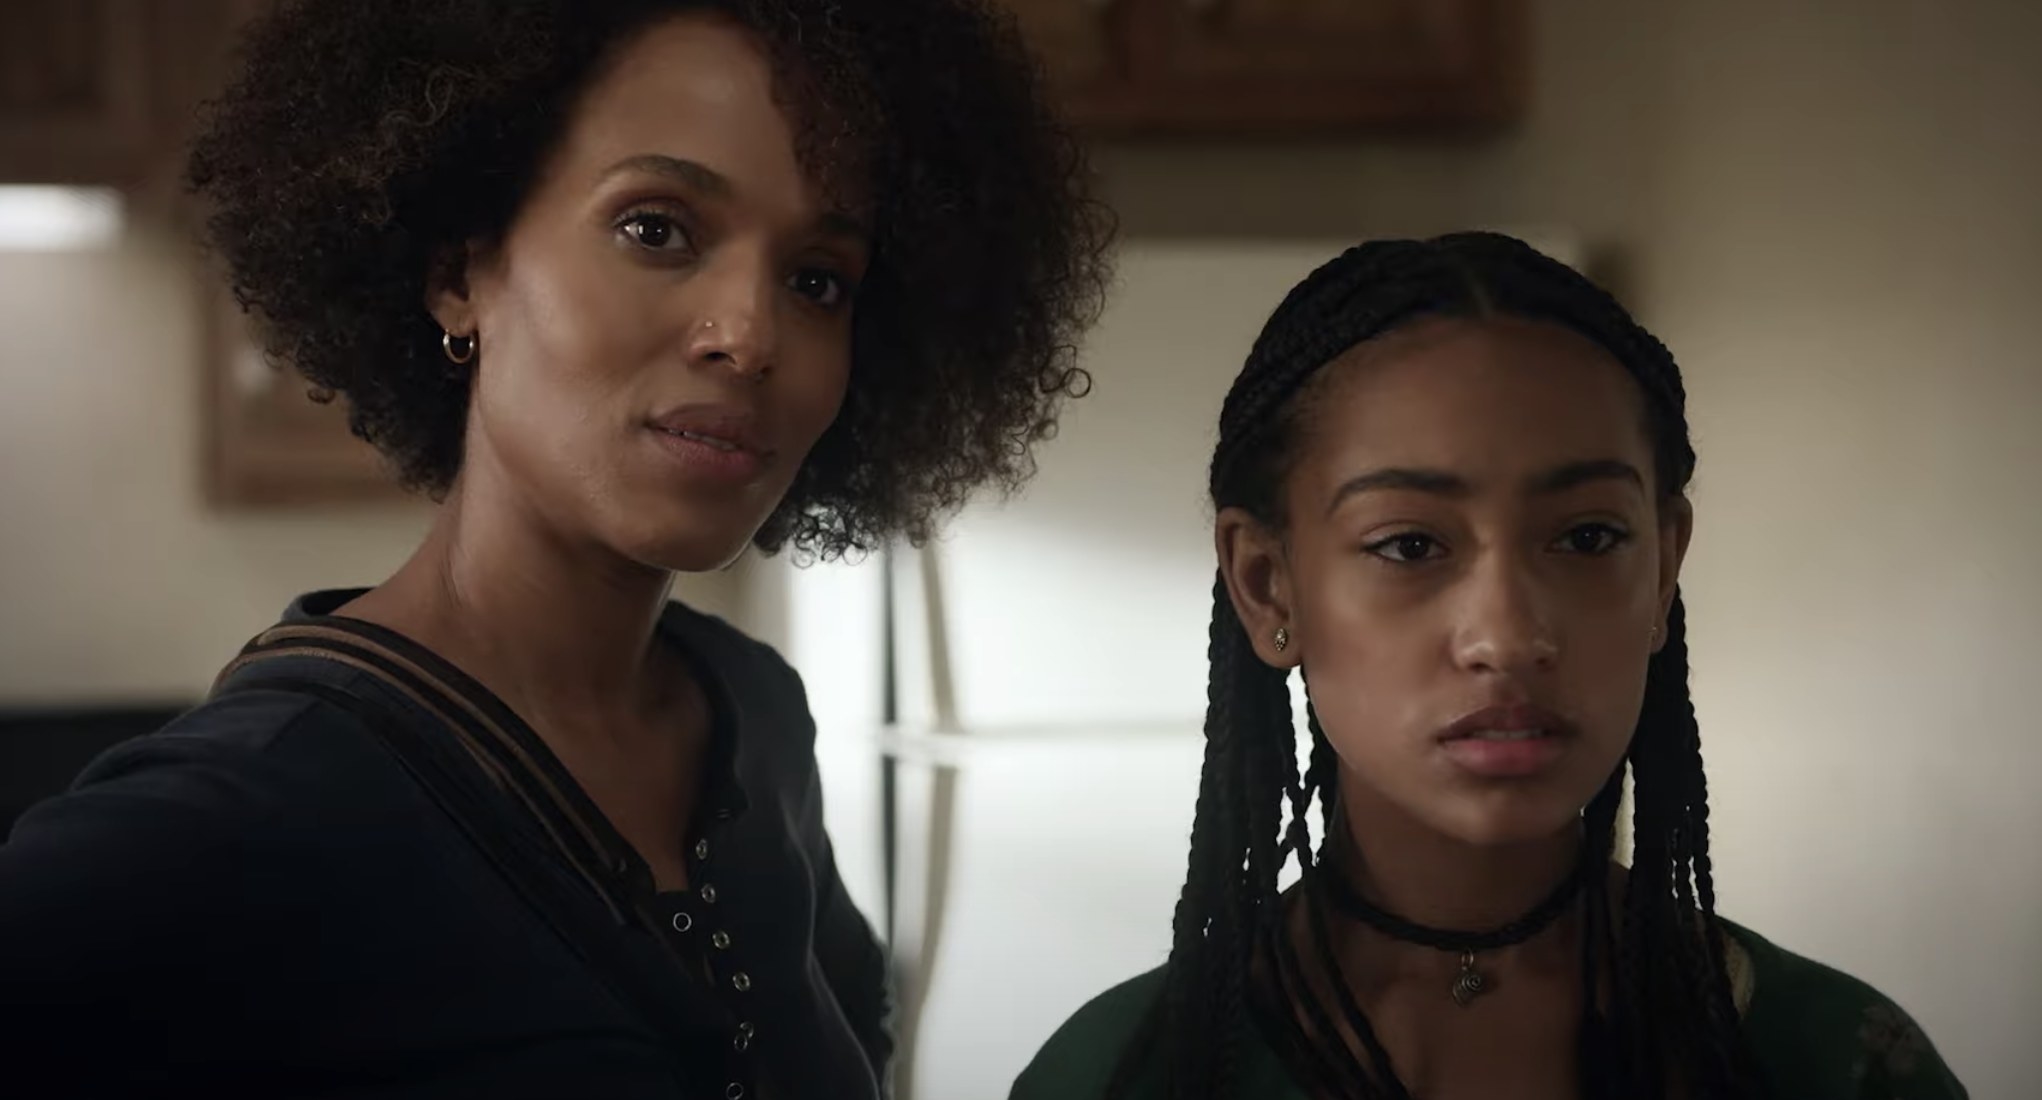 Kerry Washington stands next to Lexi Underwood as they play mother and daughter in the series Little Fires Everywhere